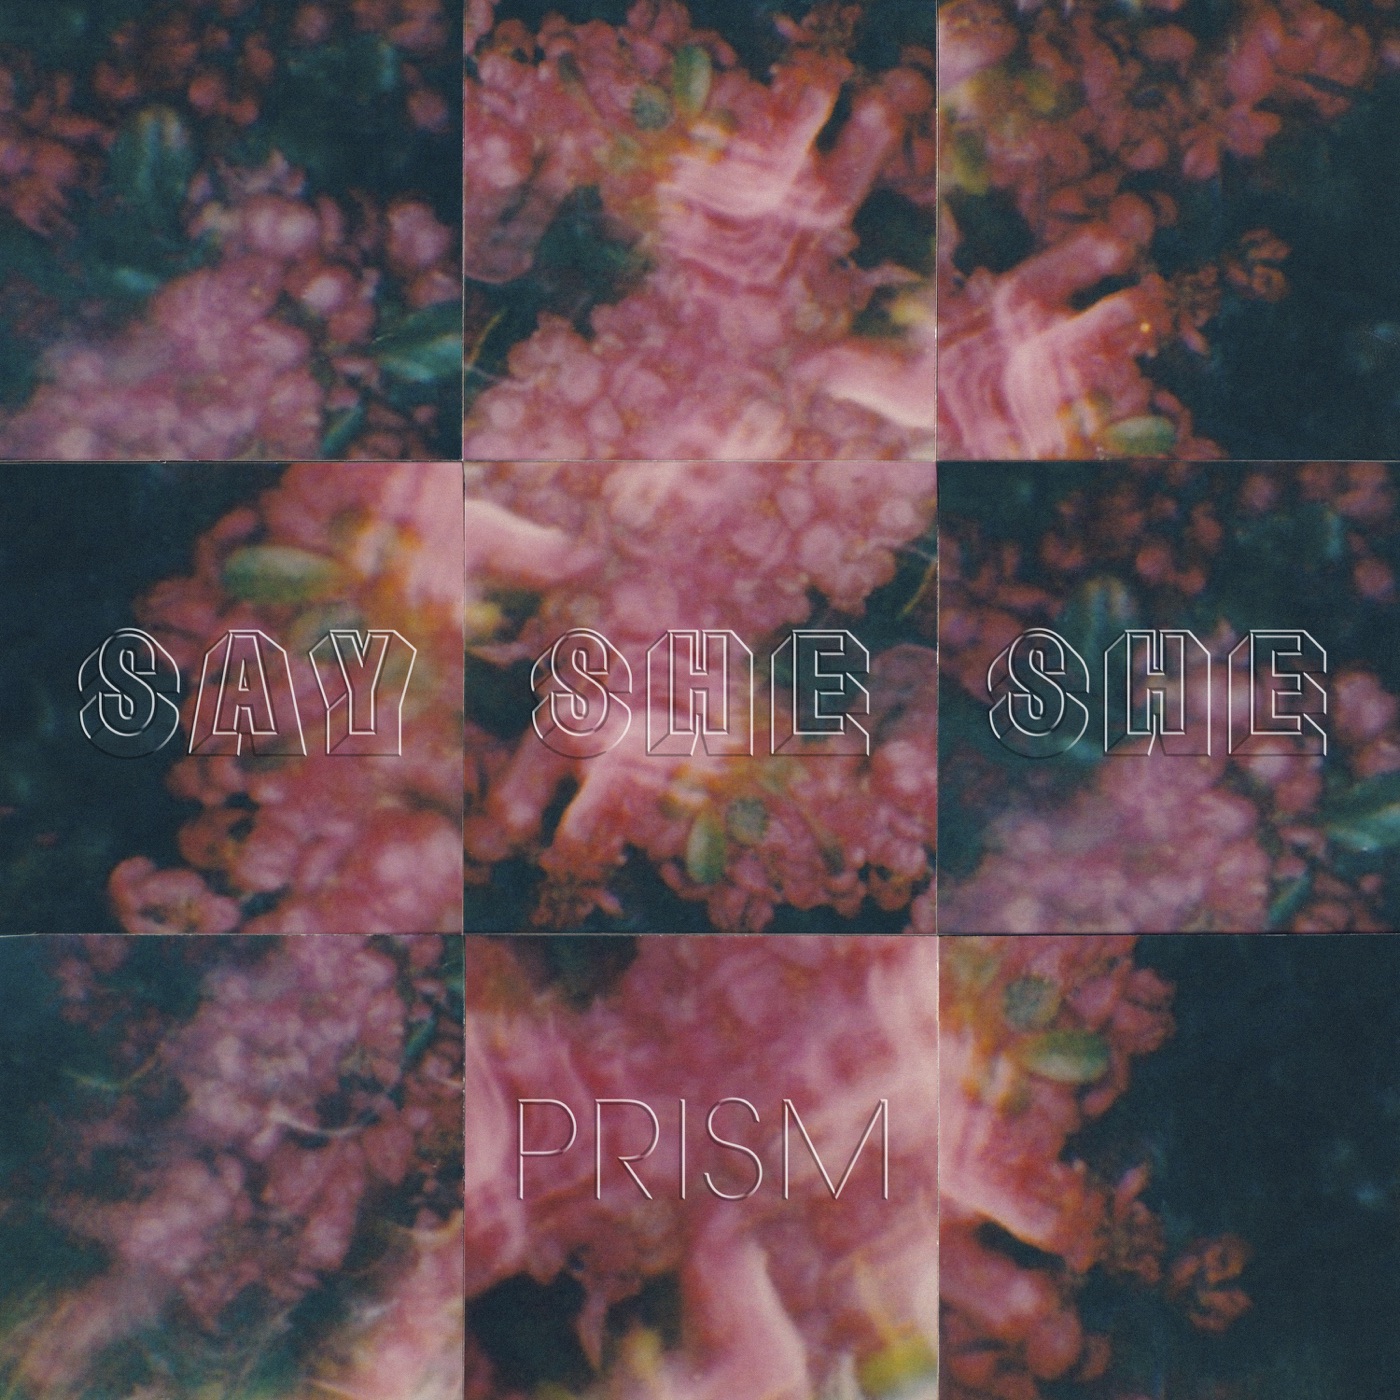 Prism by Say She She